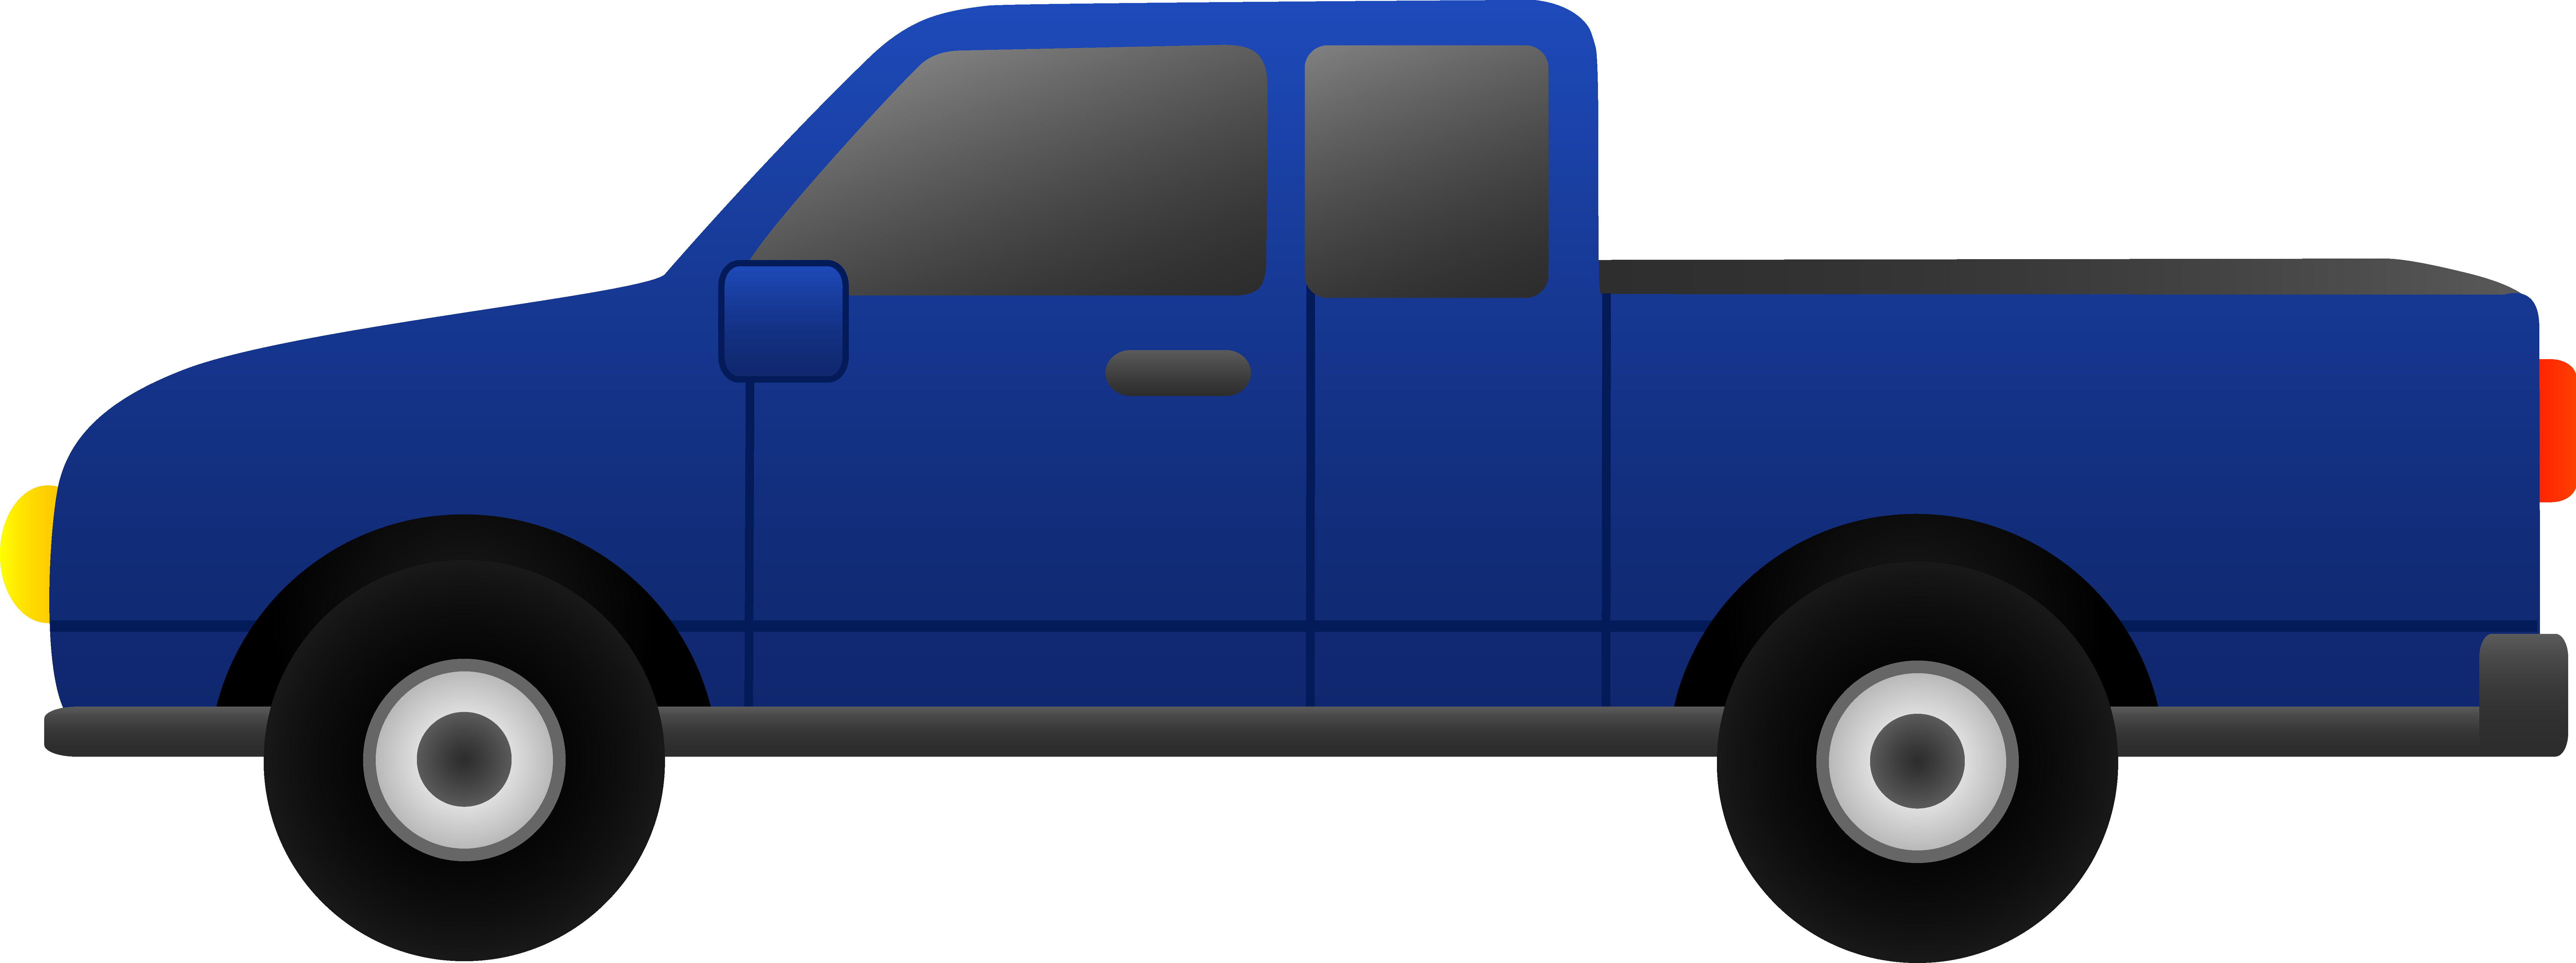 Pickup Truck Black And White Free Download Clipart